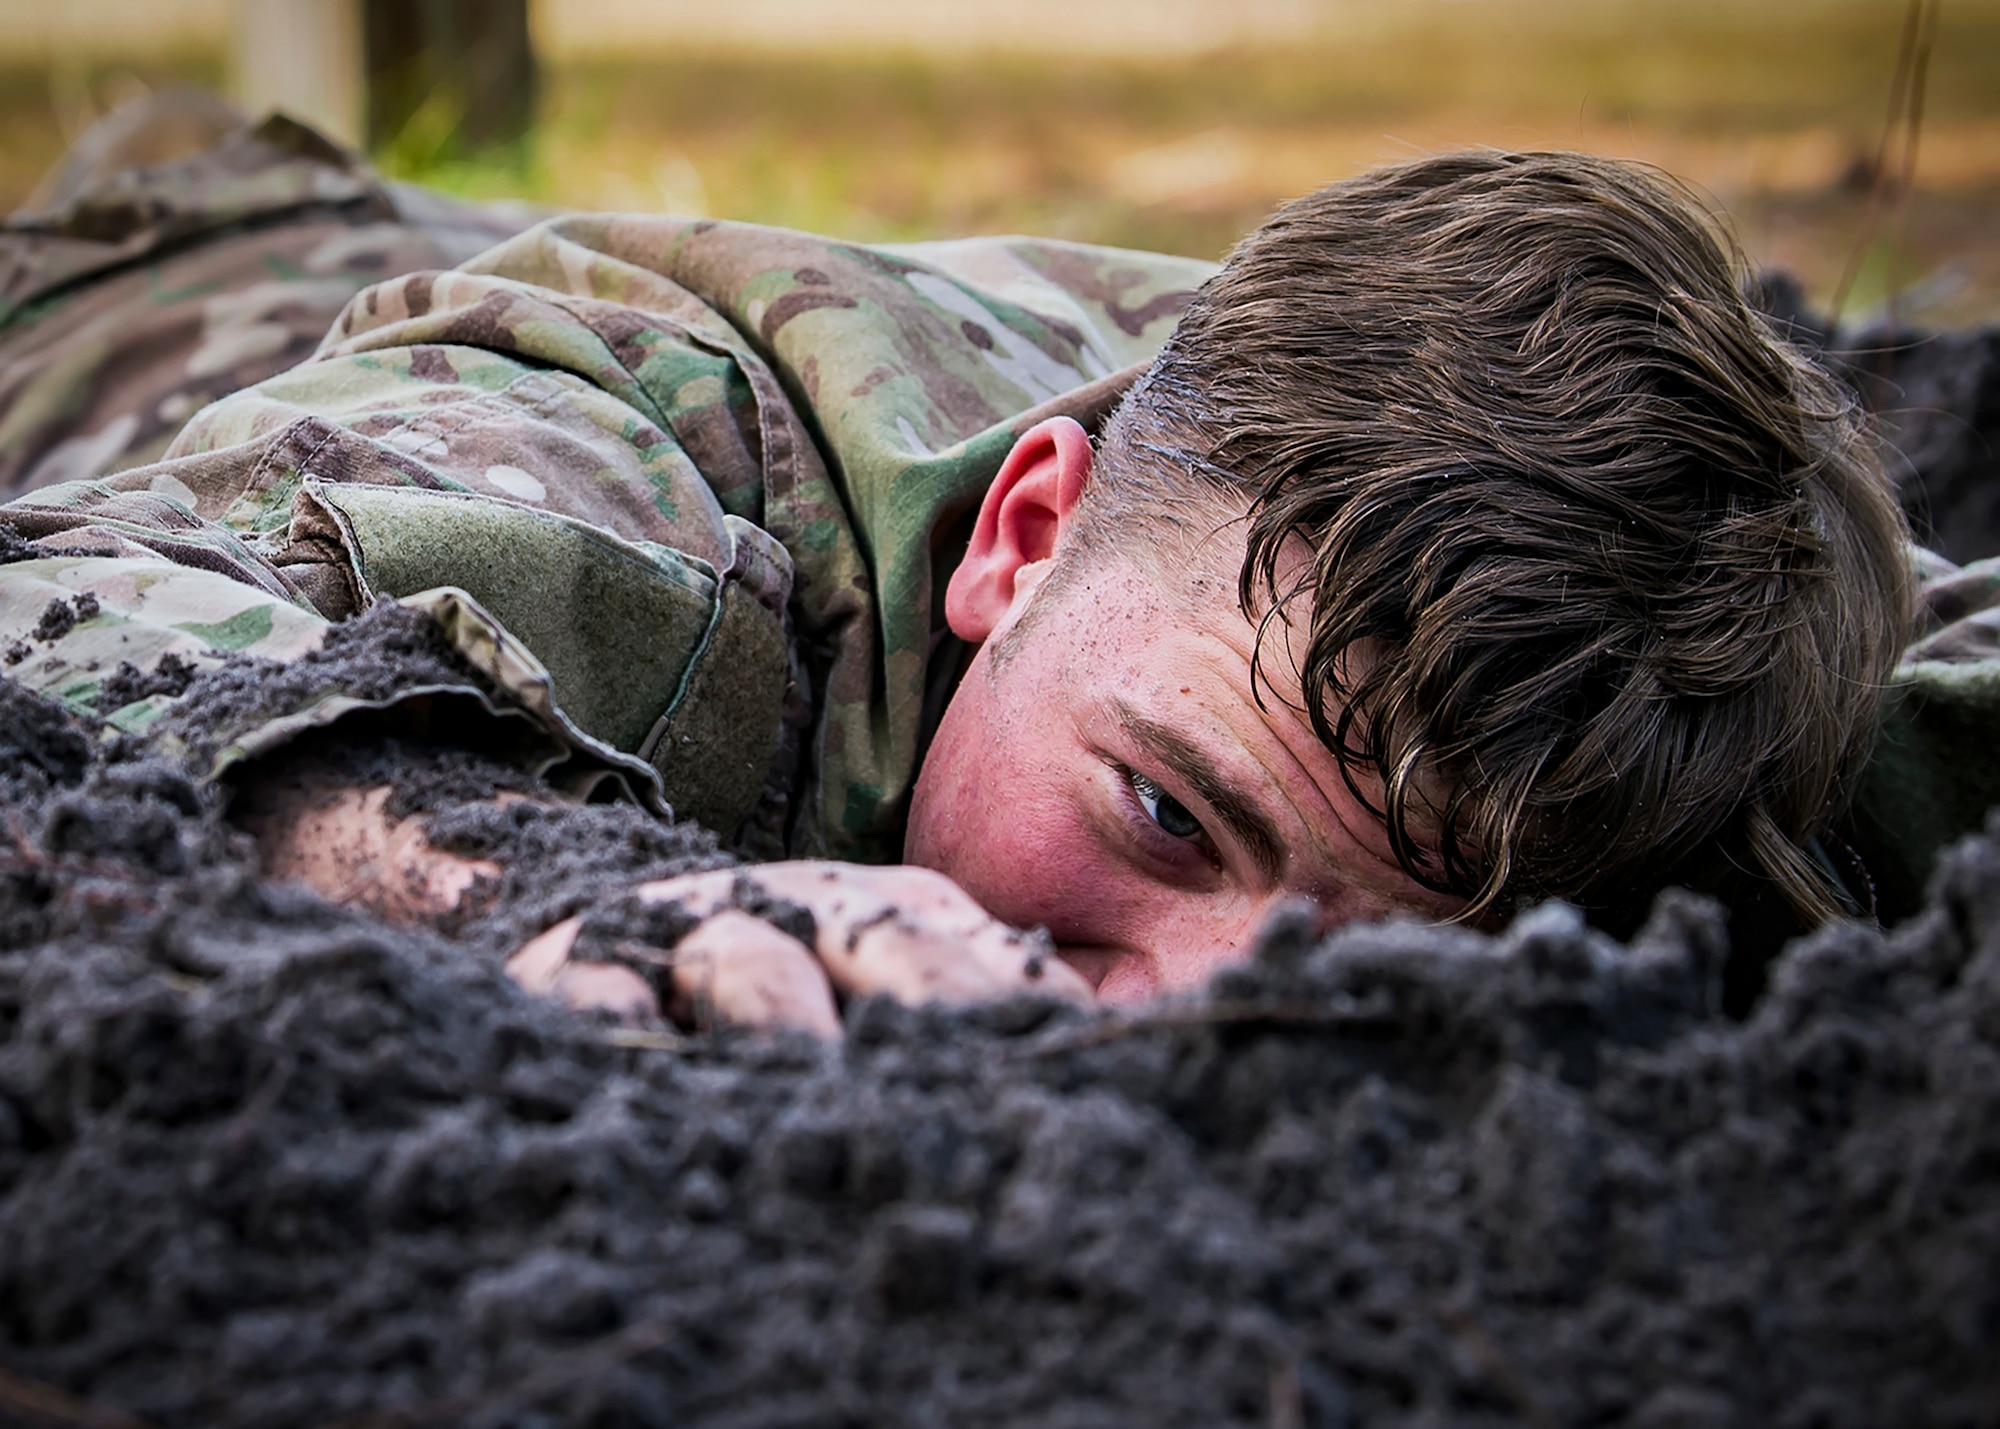 An Airman from the 820th Base Defense Group low crawls through an obstacle during an Army Air Assault Assessment (AAA), Jan. 30, 2019, at Camp Blanding, Fla. The AAA is designed to determine Airmen’s physical and mental readiness before being selected to attend Army Air Assault school. (U.S. Air Force photo by Airman First Class Eugene Oliver)